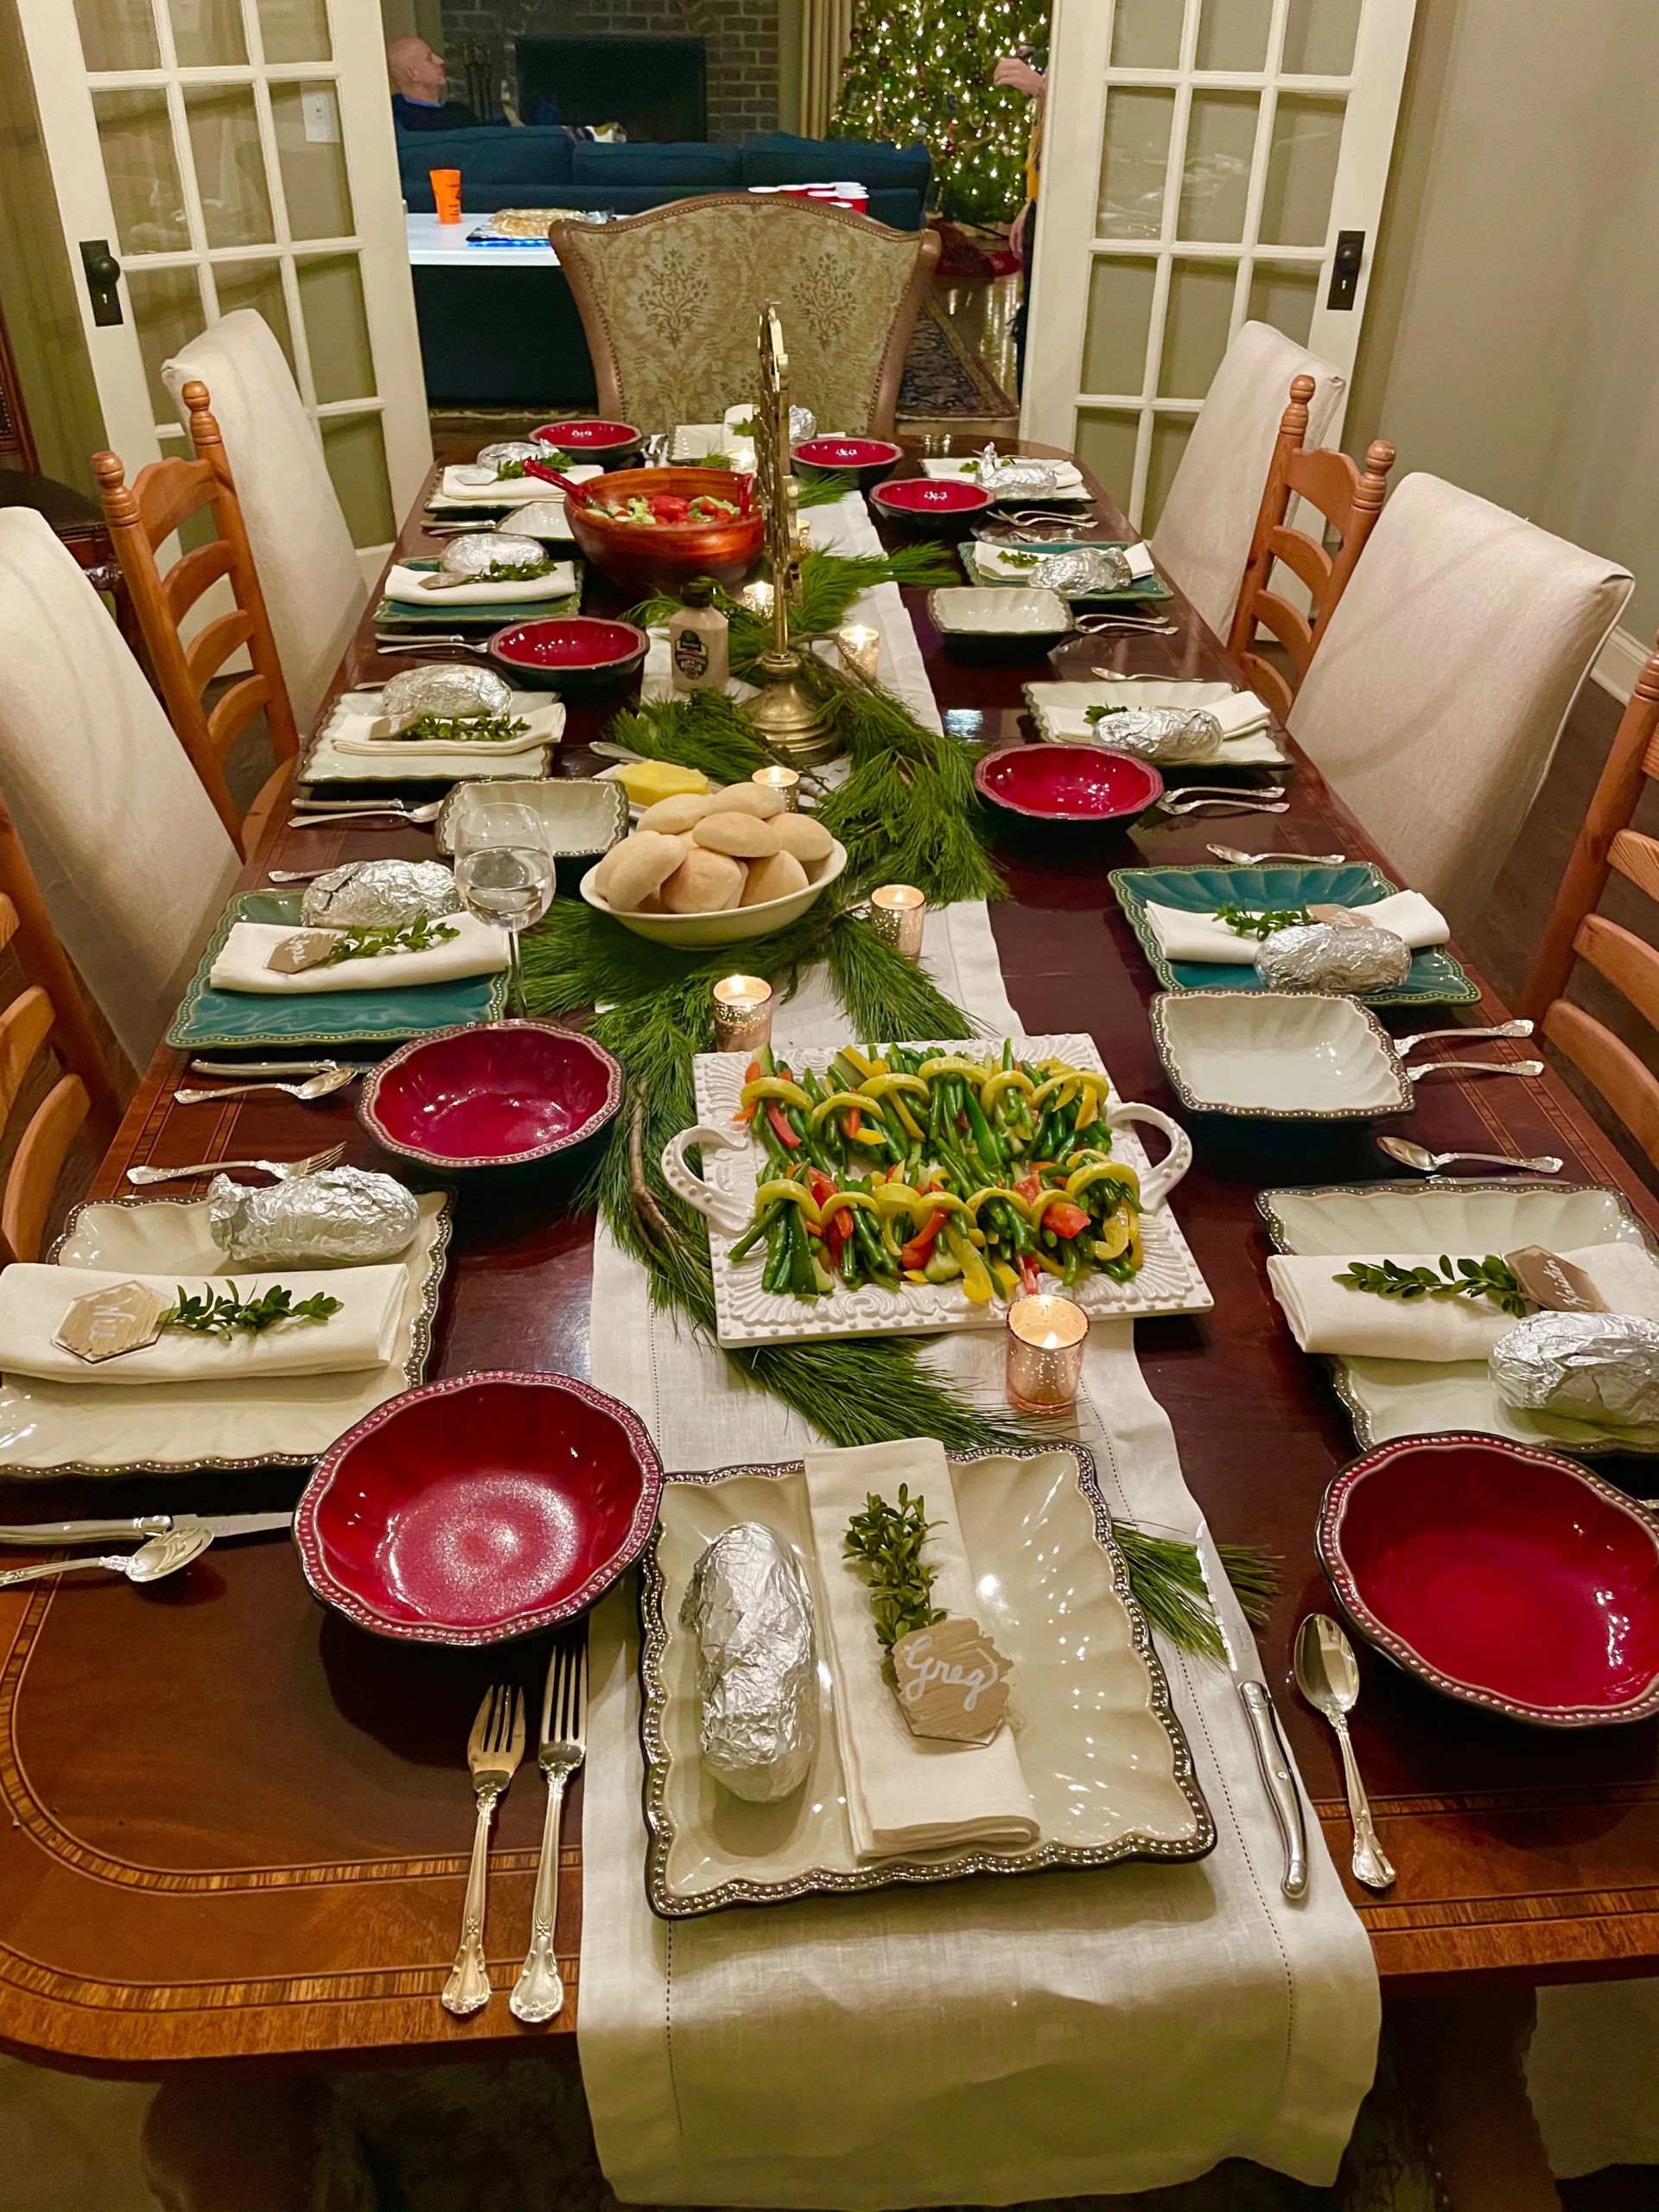 White Tablerunner Red Bowls Green Pine Leaves Garland Centerpiece Bread Christmas Tree Angle View Dining Tables